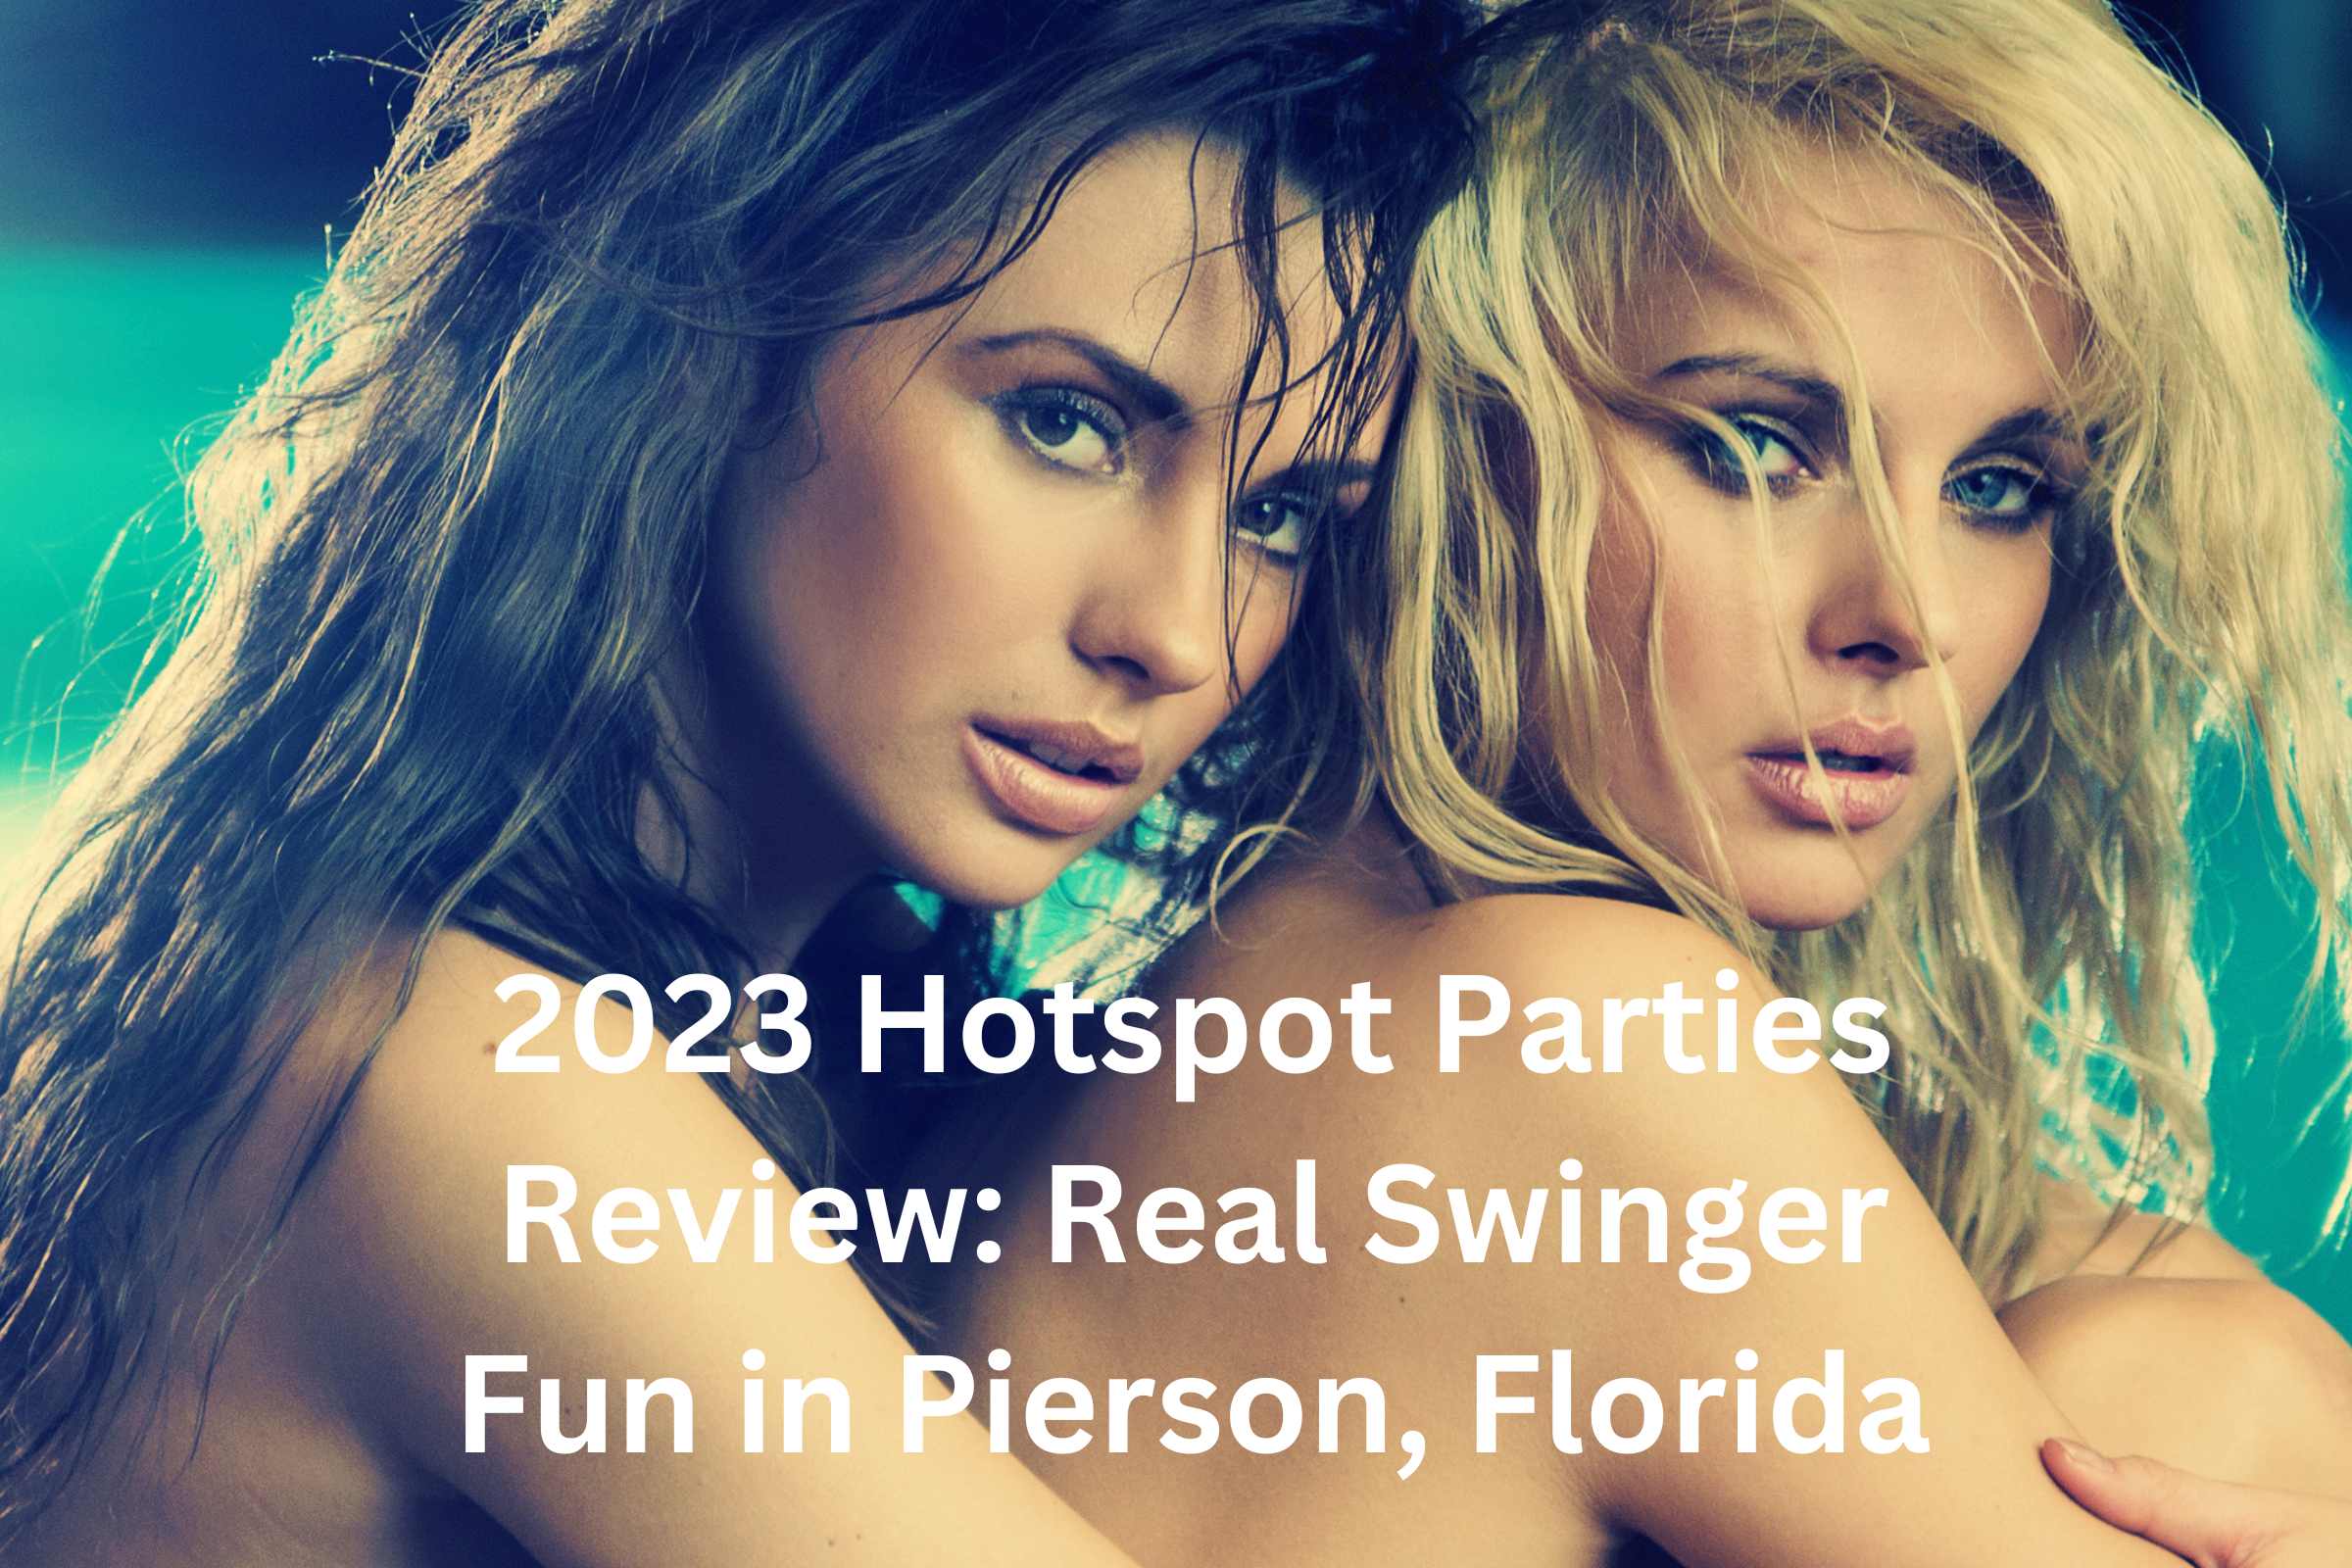 2023 Hotspot Parties Review Real Swinger Fun in Pierson, Florida